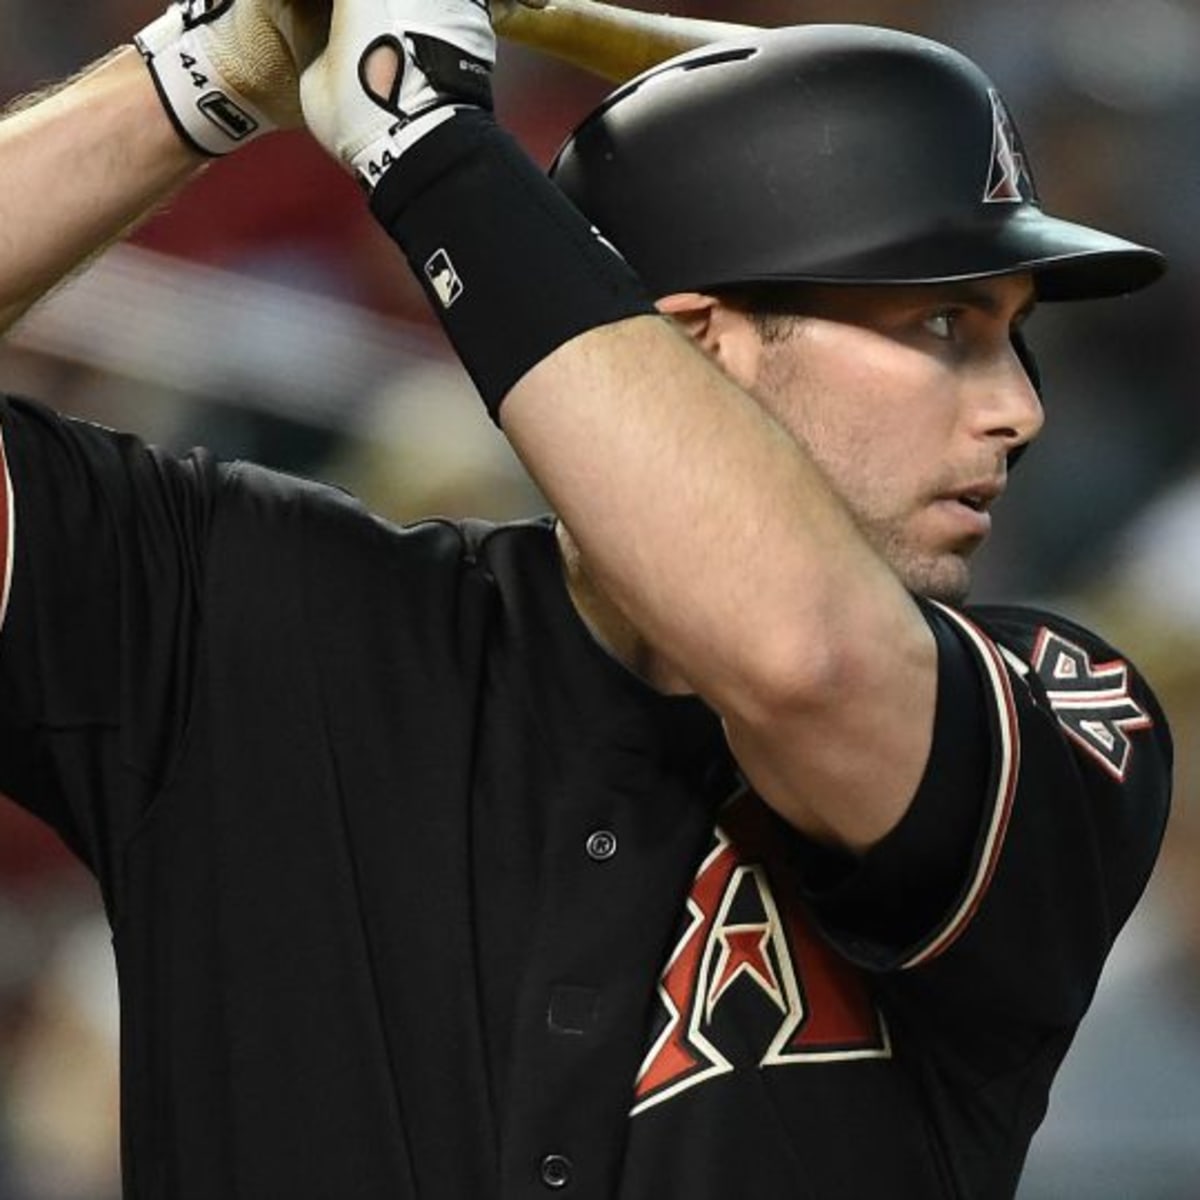 Paul Goldschmidt might sign a big ole extension (with the